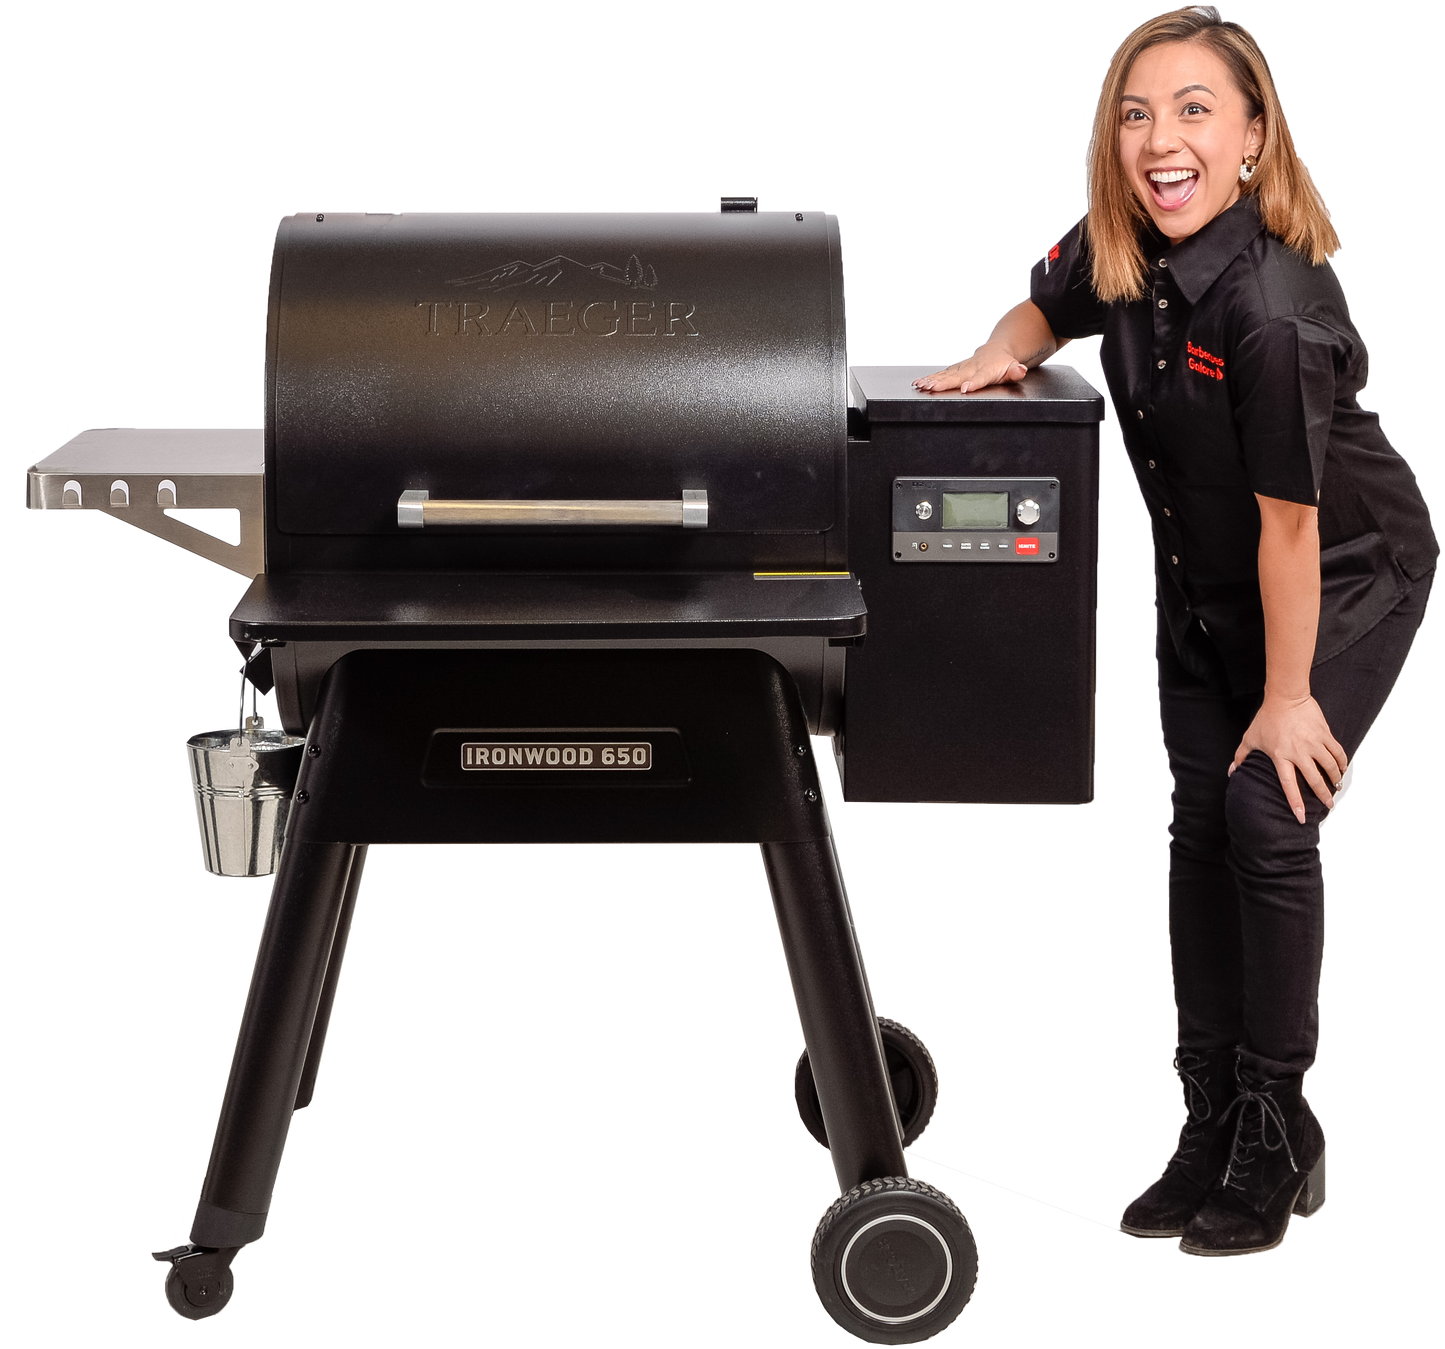 Traeger Ironwood 650 Pellet Grill | Pellet grills and smokers are where it’s at this summer | Barbecues Galore: Burlington, Oakville, Etobicoke & Calgary